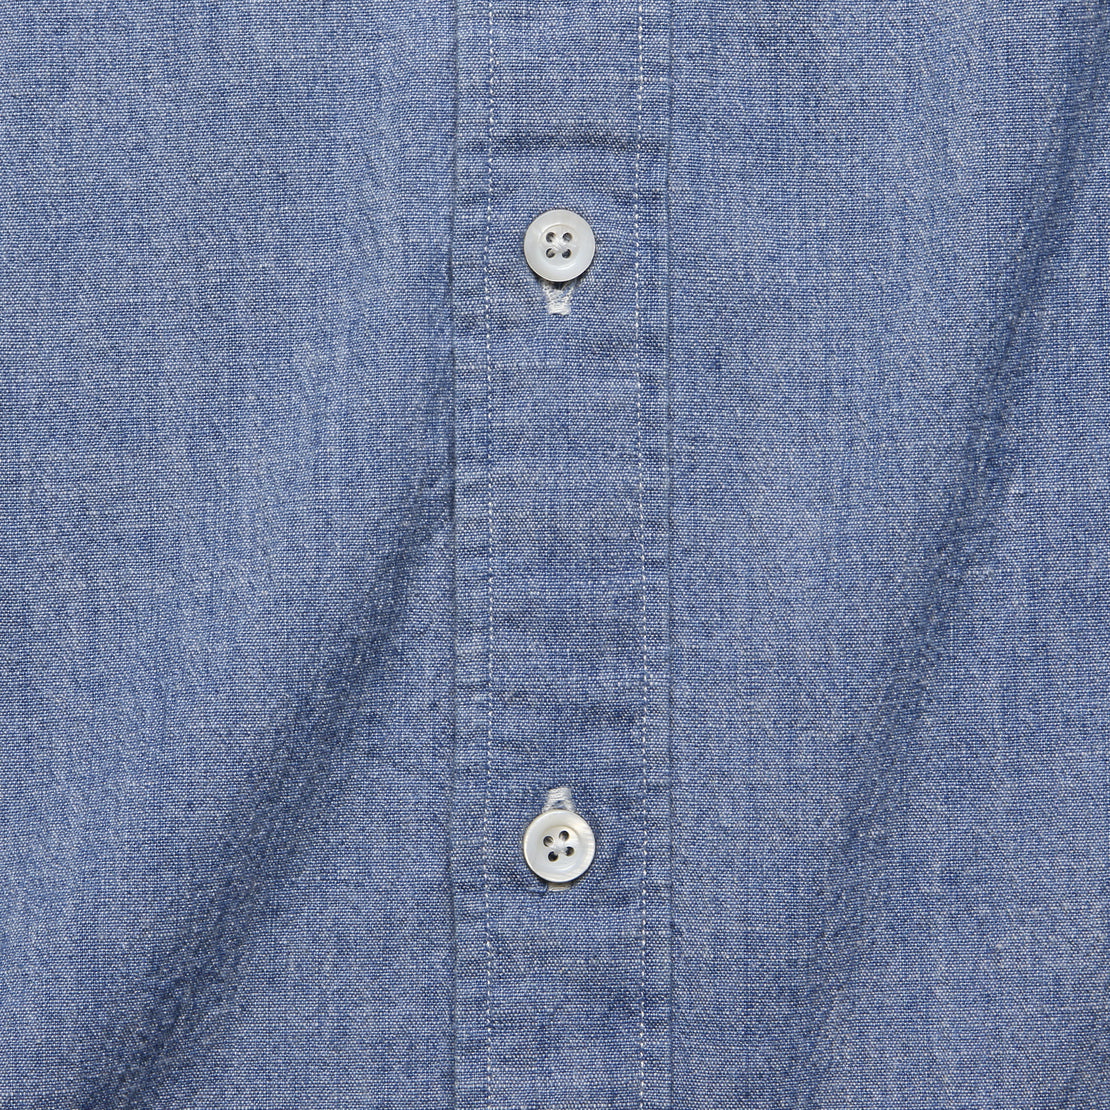 Collins Workshirt - Light Wash Indigo - Faherty - STAG Provisions - Tops - L/S Woven - Solid